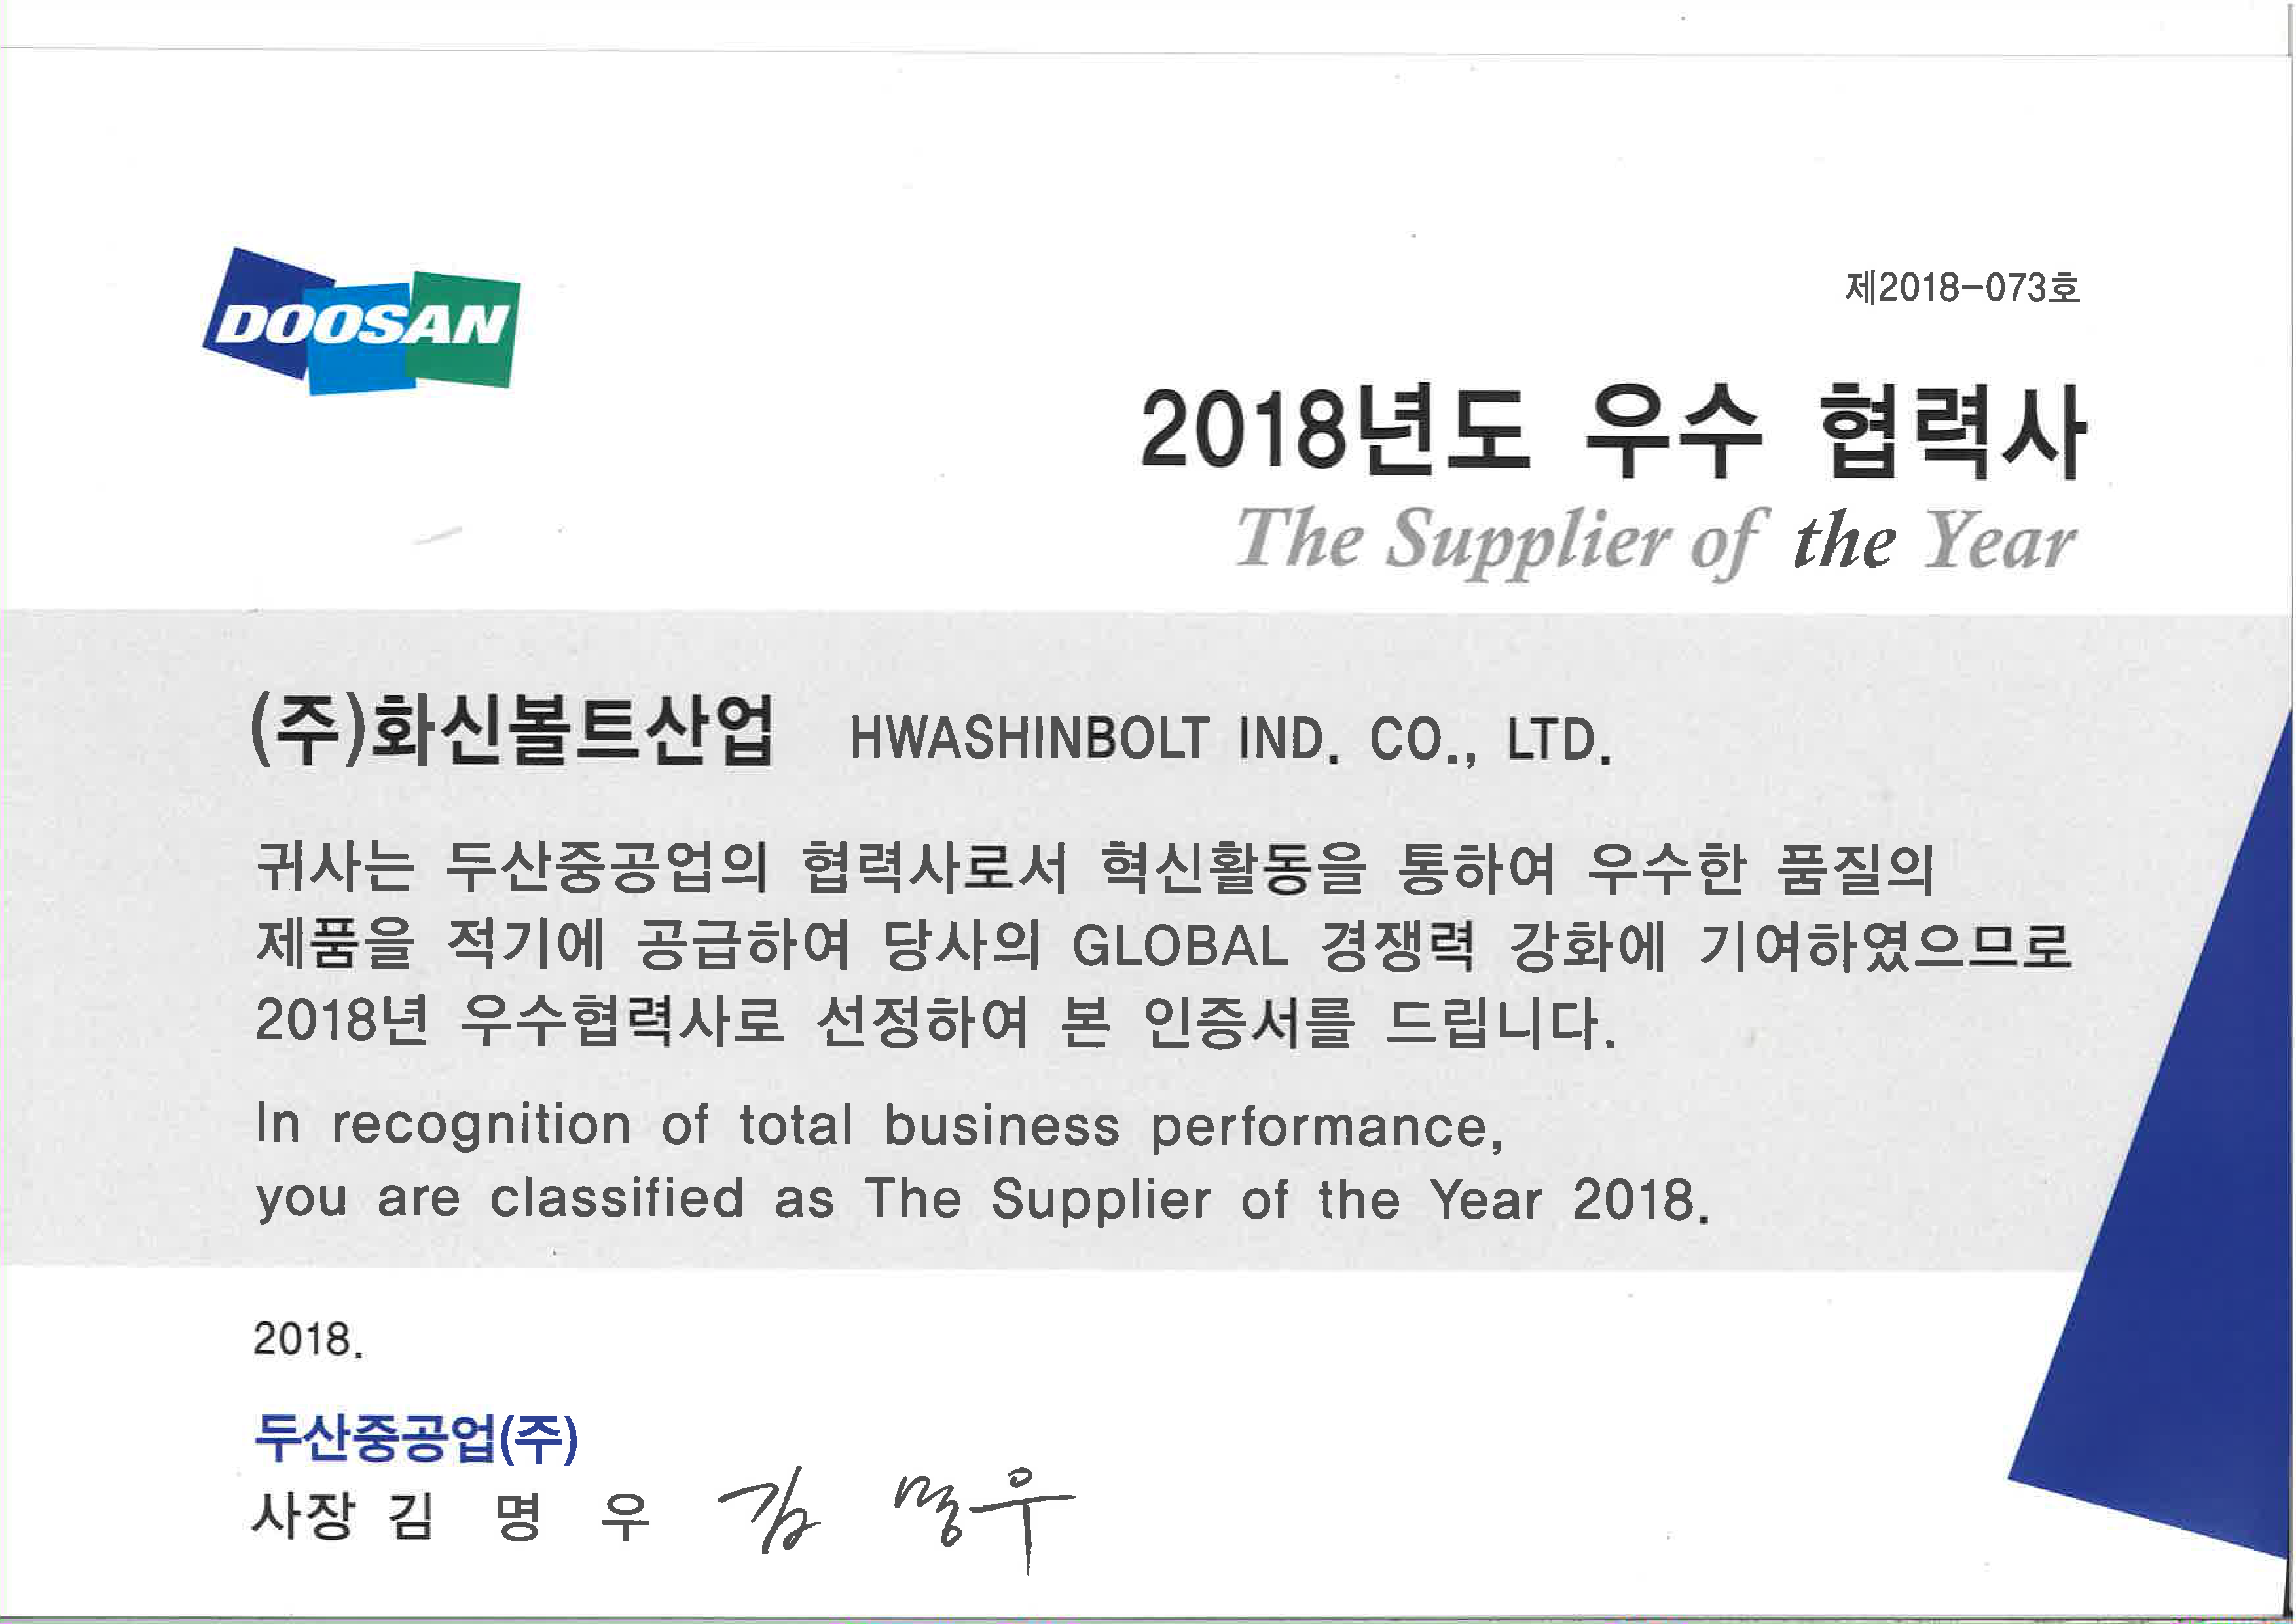 Selected as an excellent partner of Doosan Heavy Industries & Construction,(10 consecutive years)